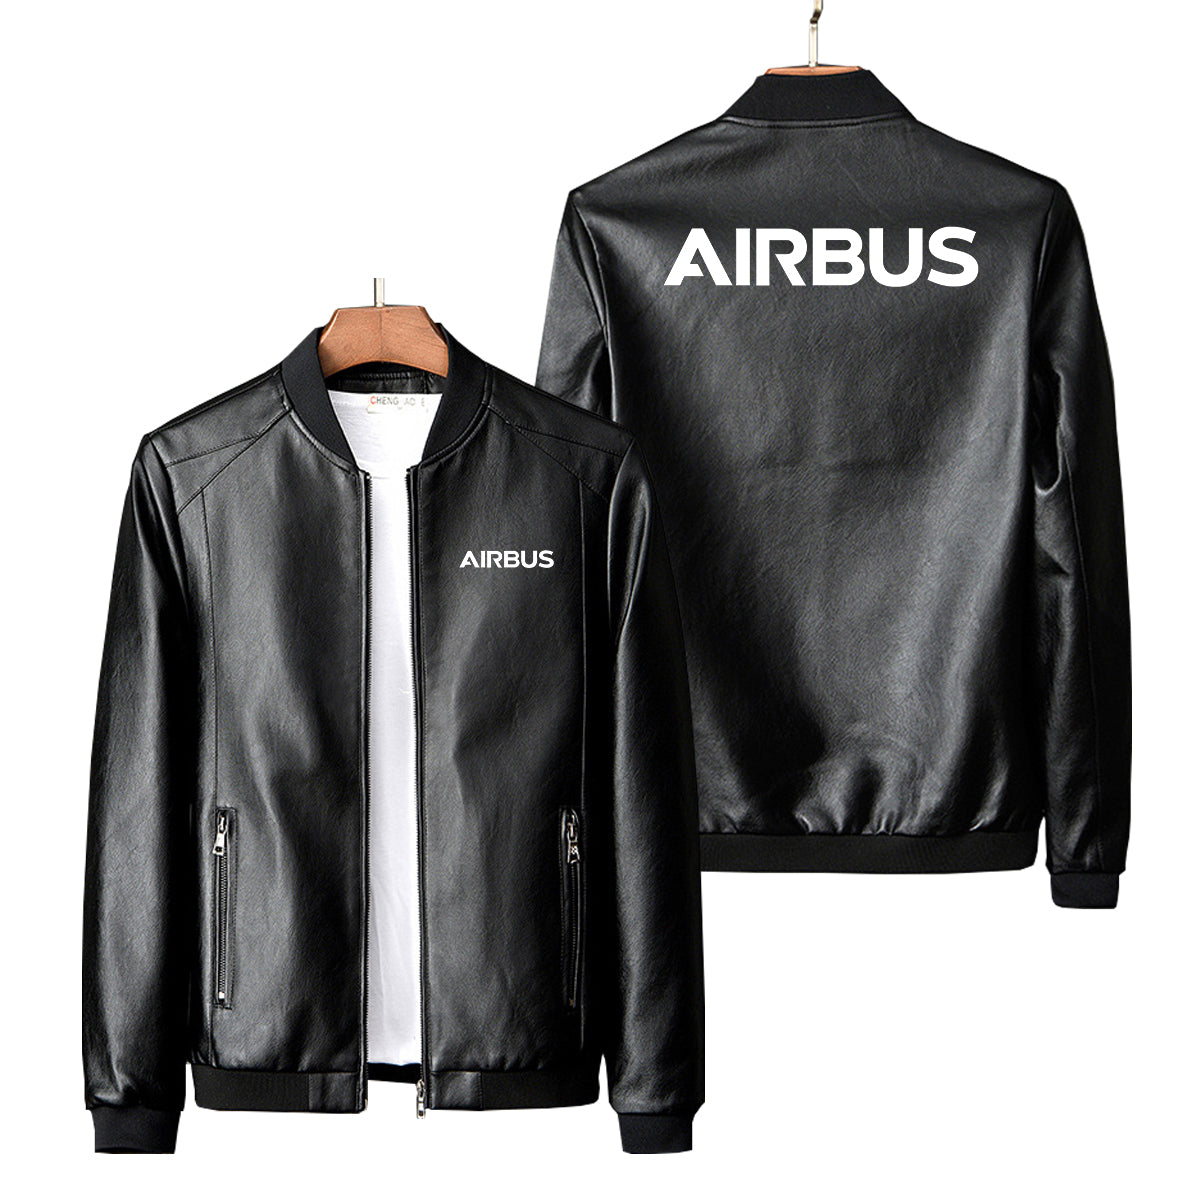 Airbus & Text Designed PU Leather Jackets